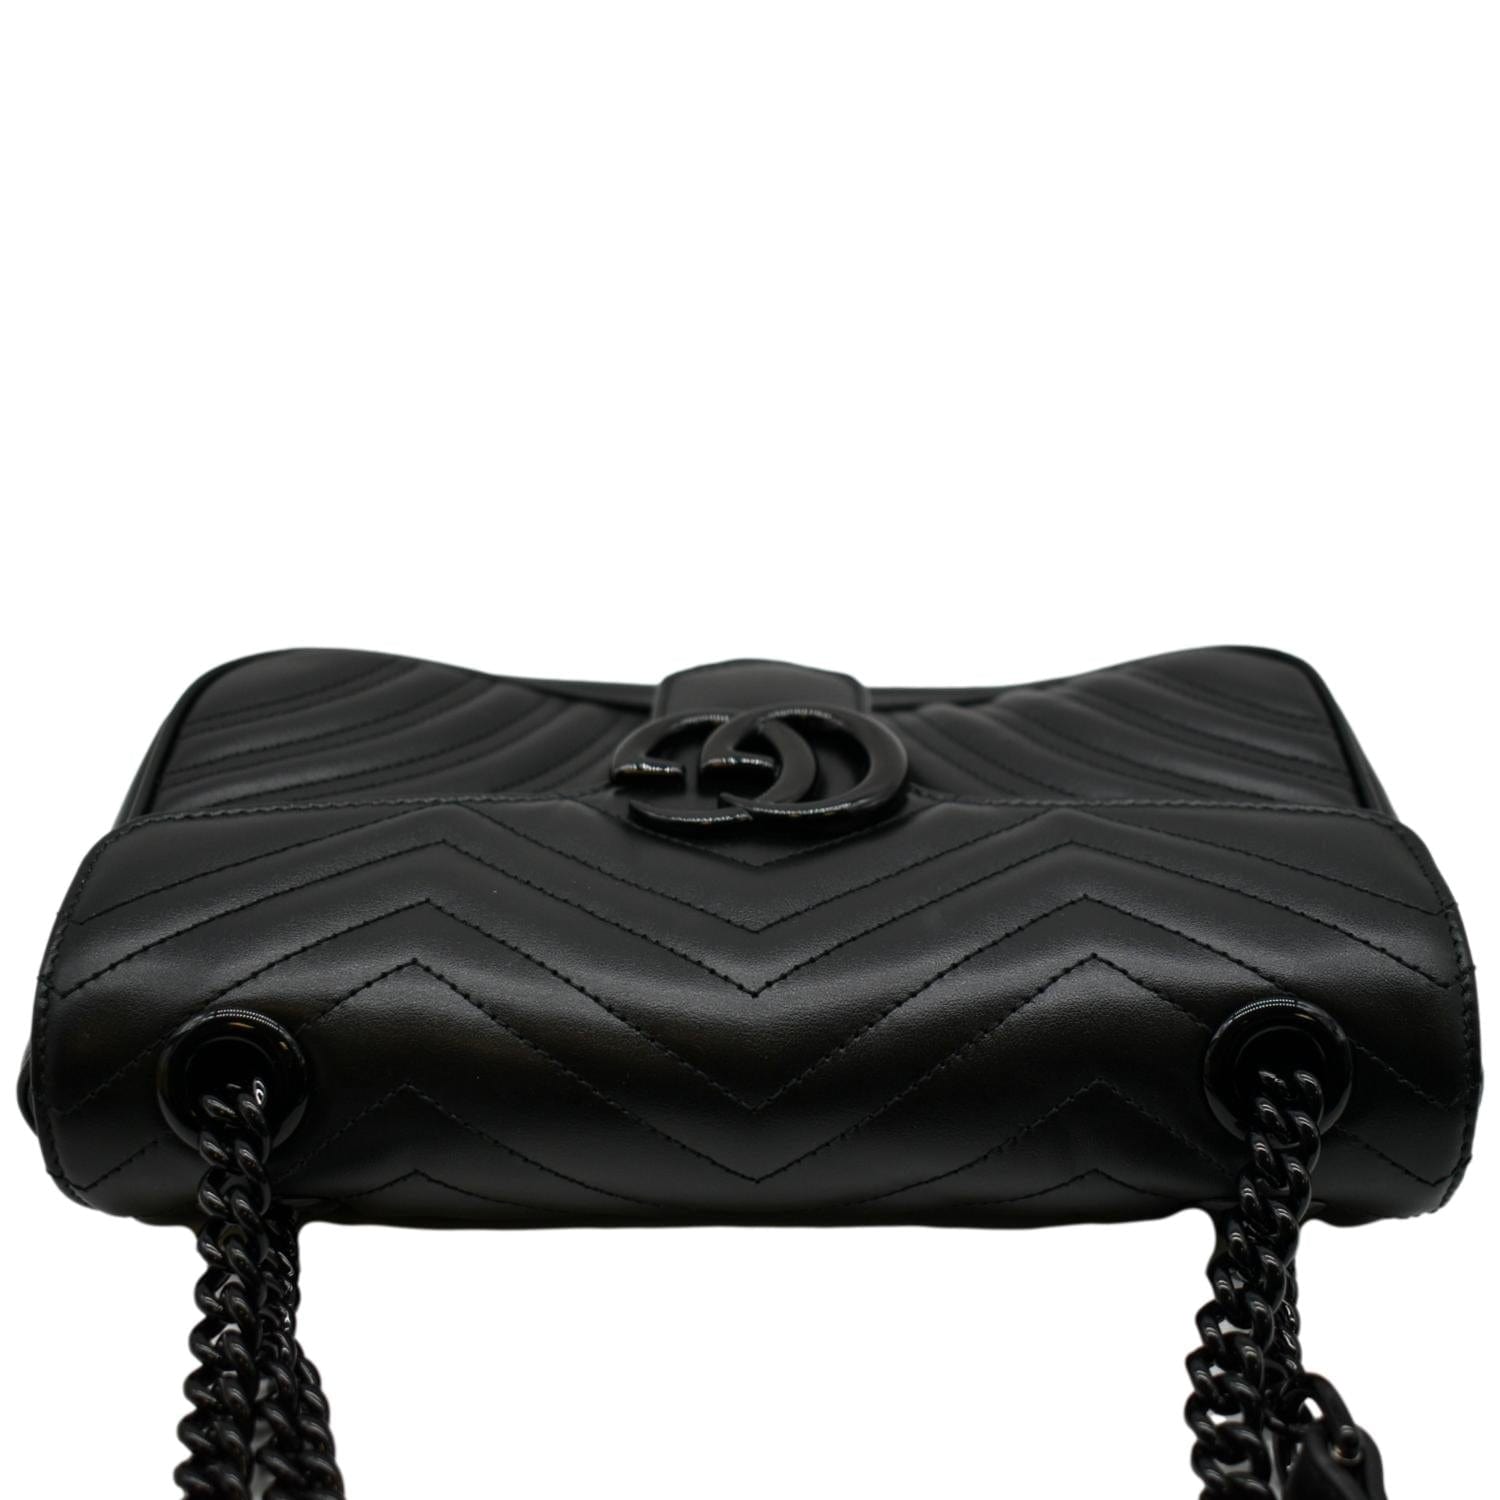 Gucci Shoulder Bag Gg Marmont Small Size In Matelassè Leather Worked With  Chevron Pattern And Heart On The Back in Black